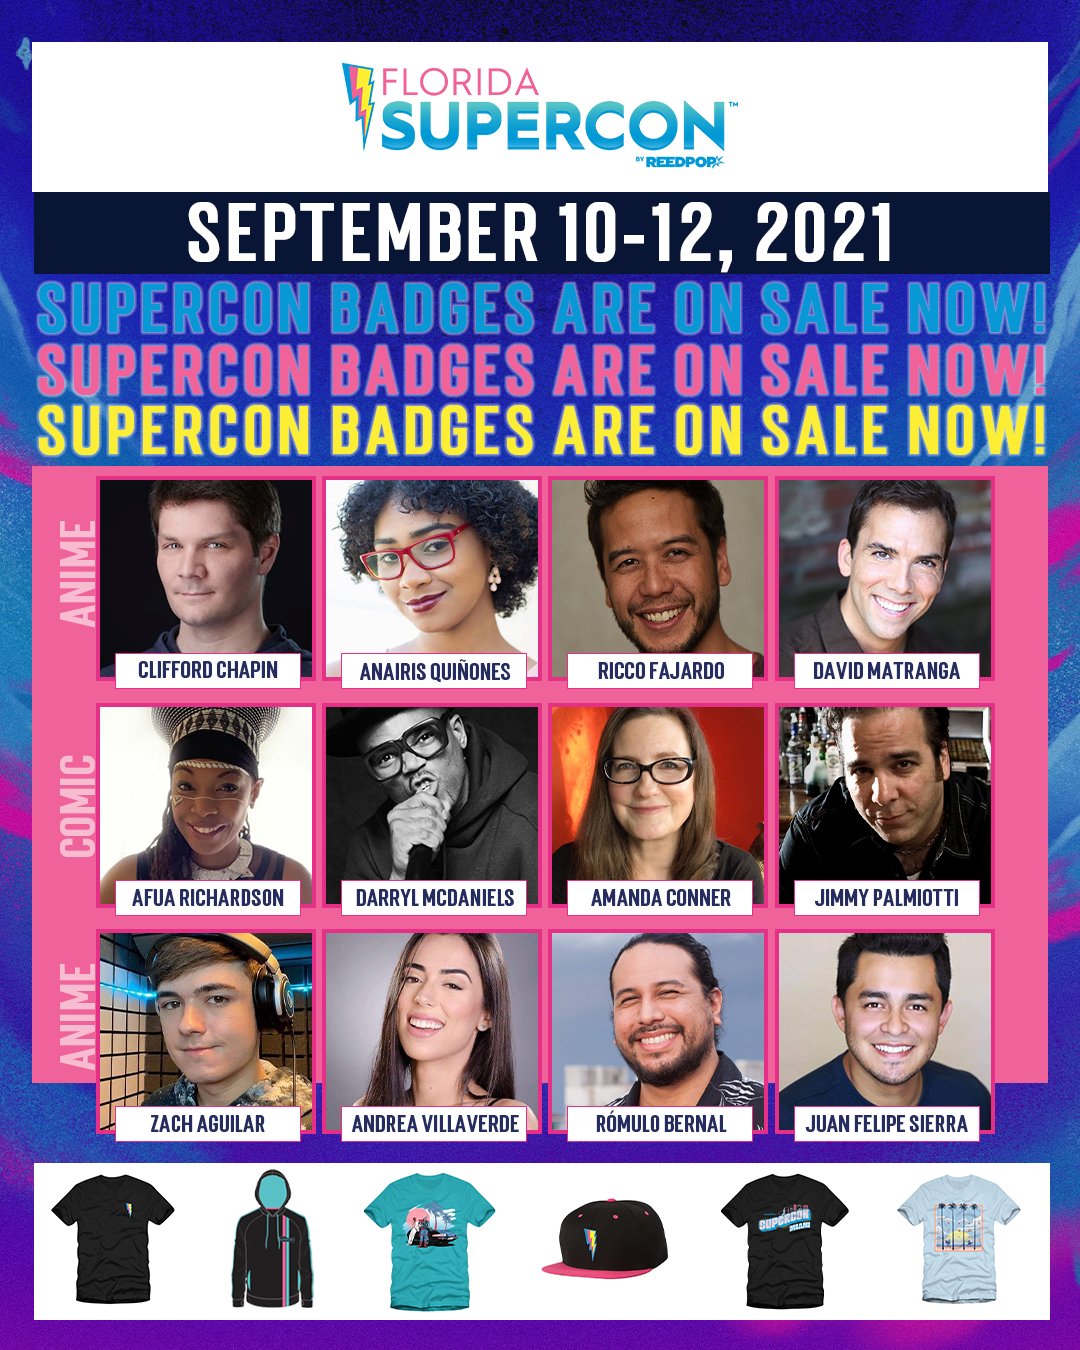 Florida Supercon on Twitter "Florida Supercon badges are officially